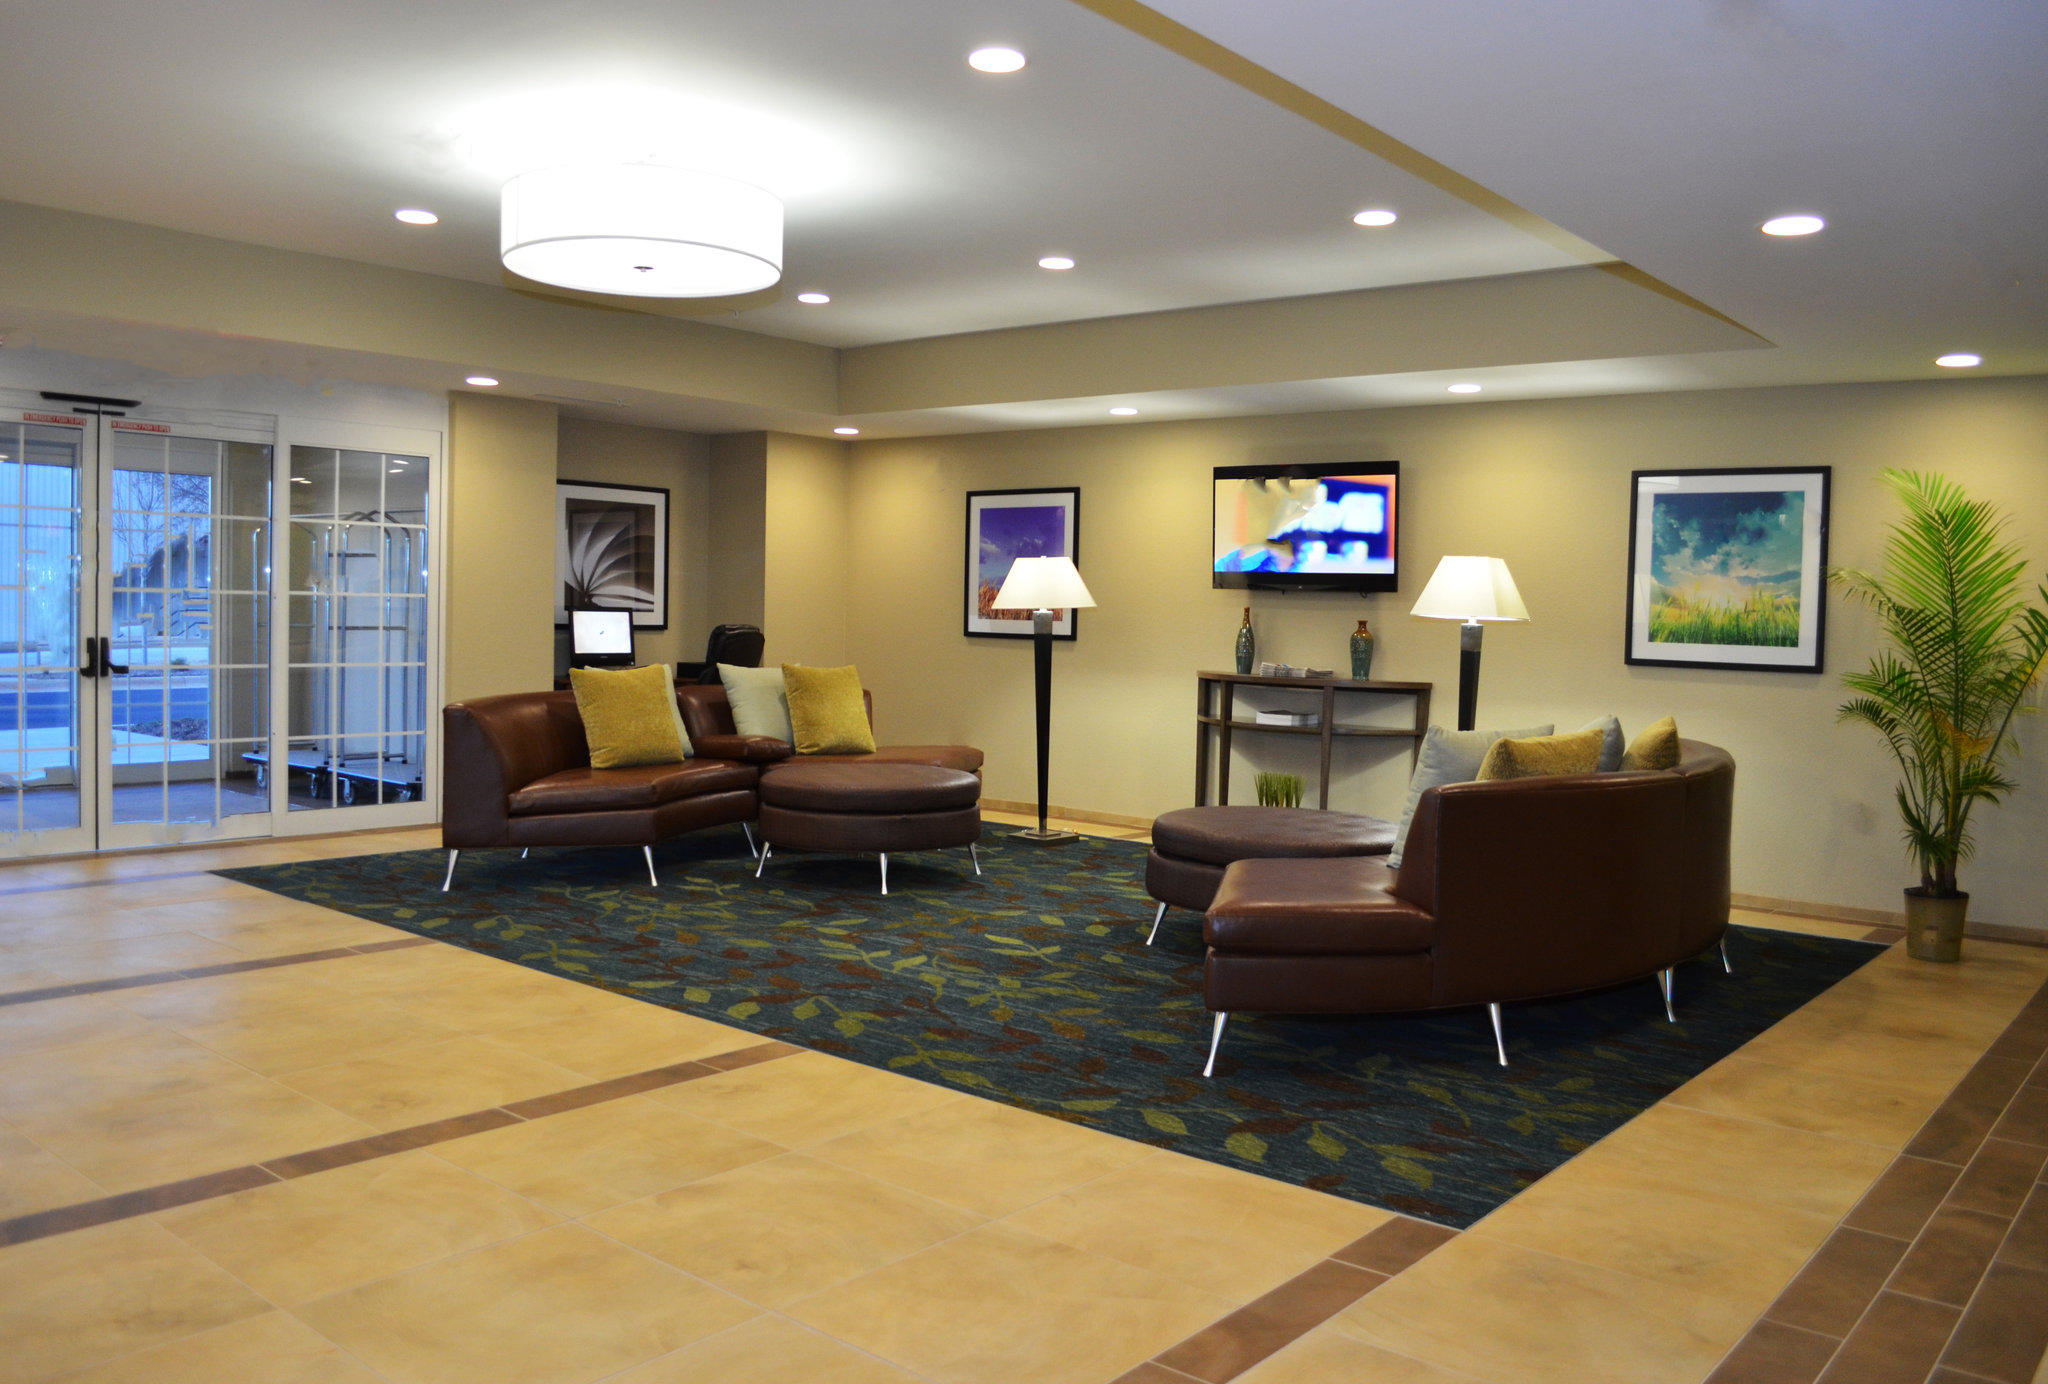 Candlewood Suites Greenville Photo